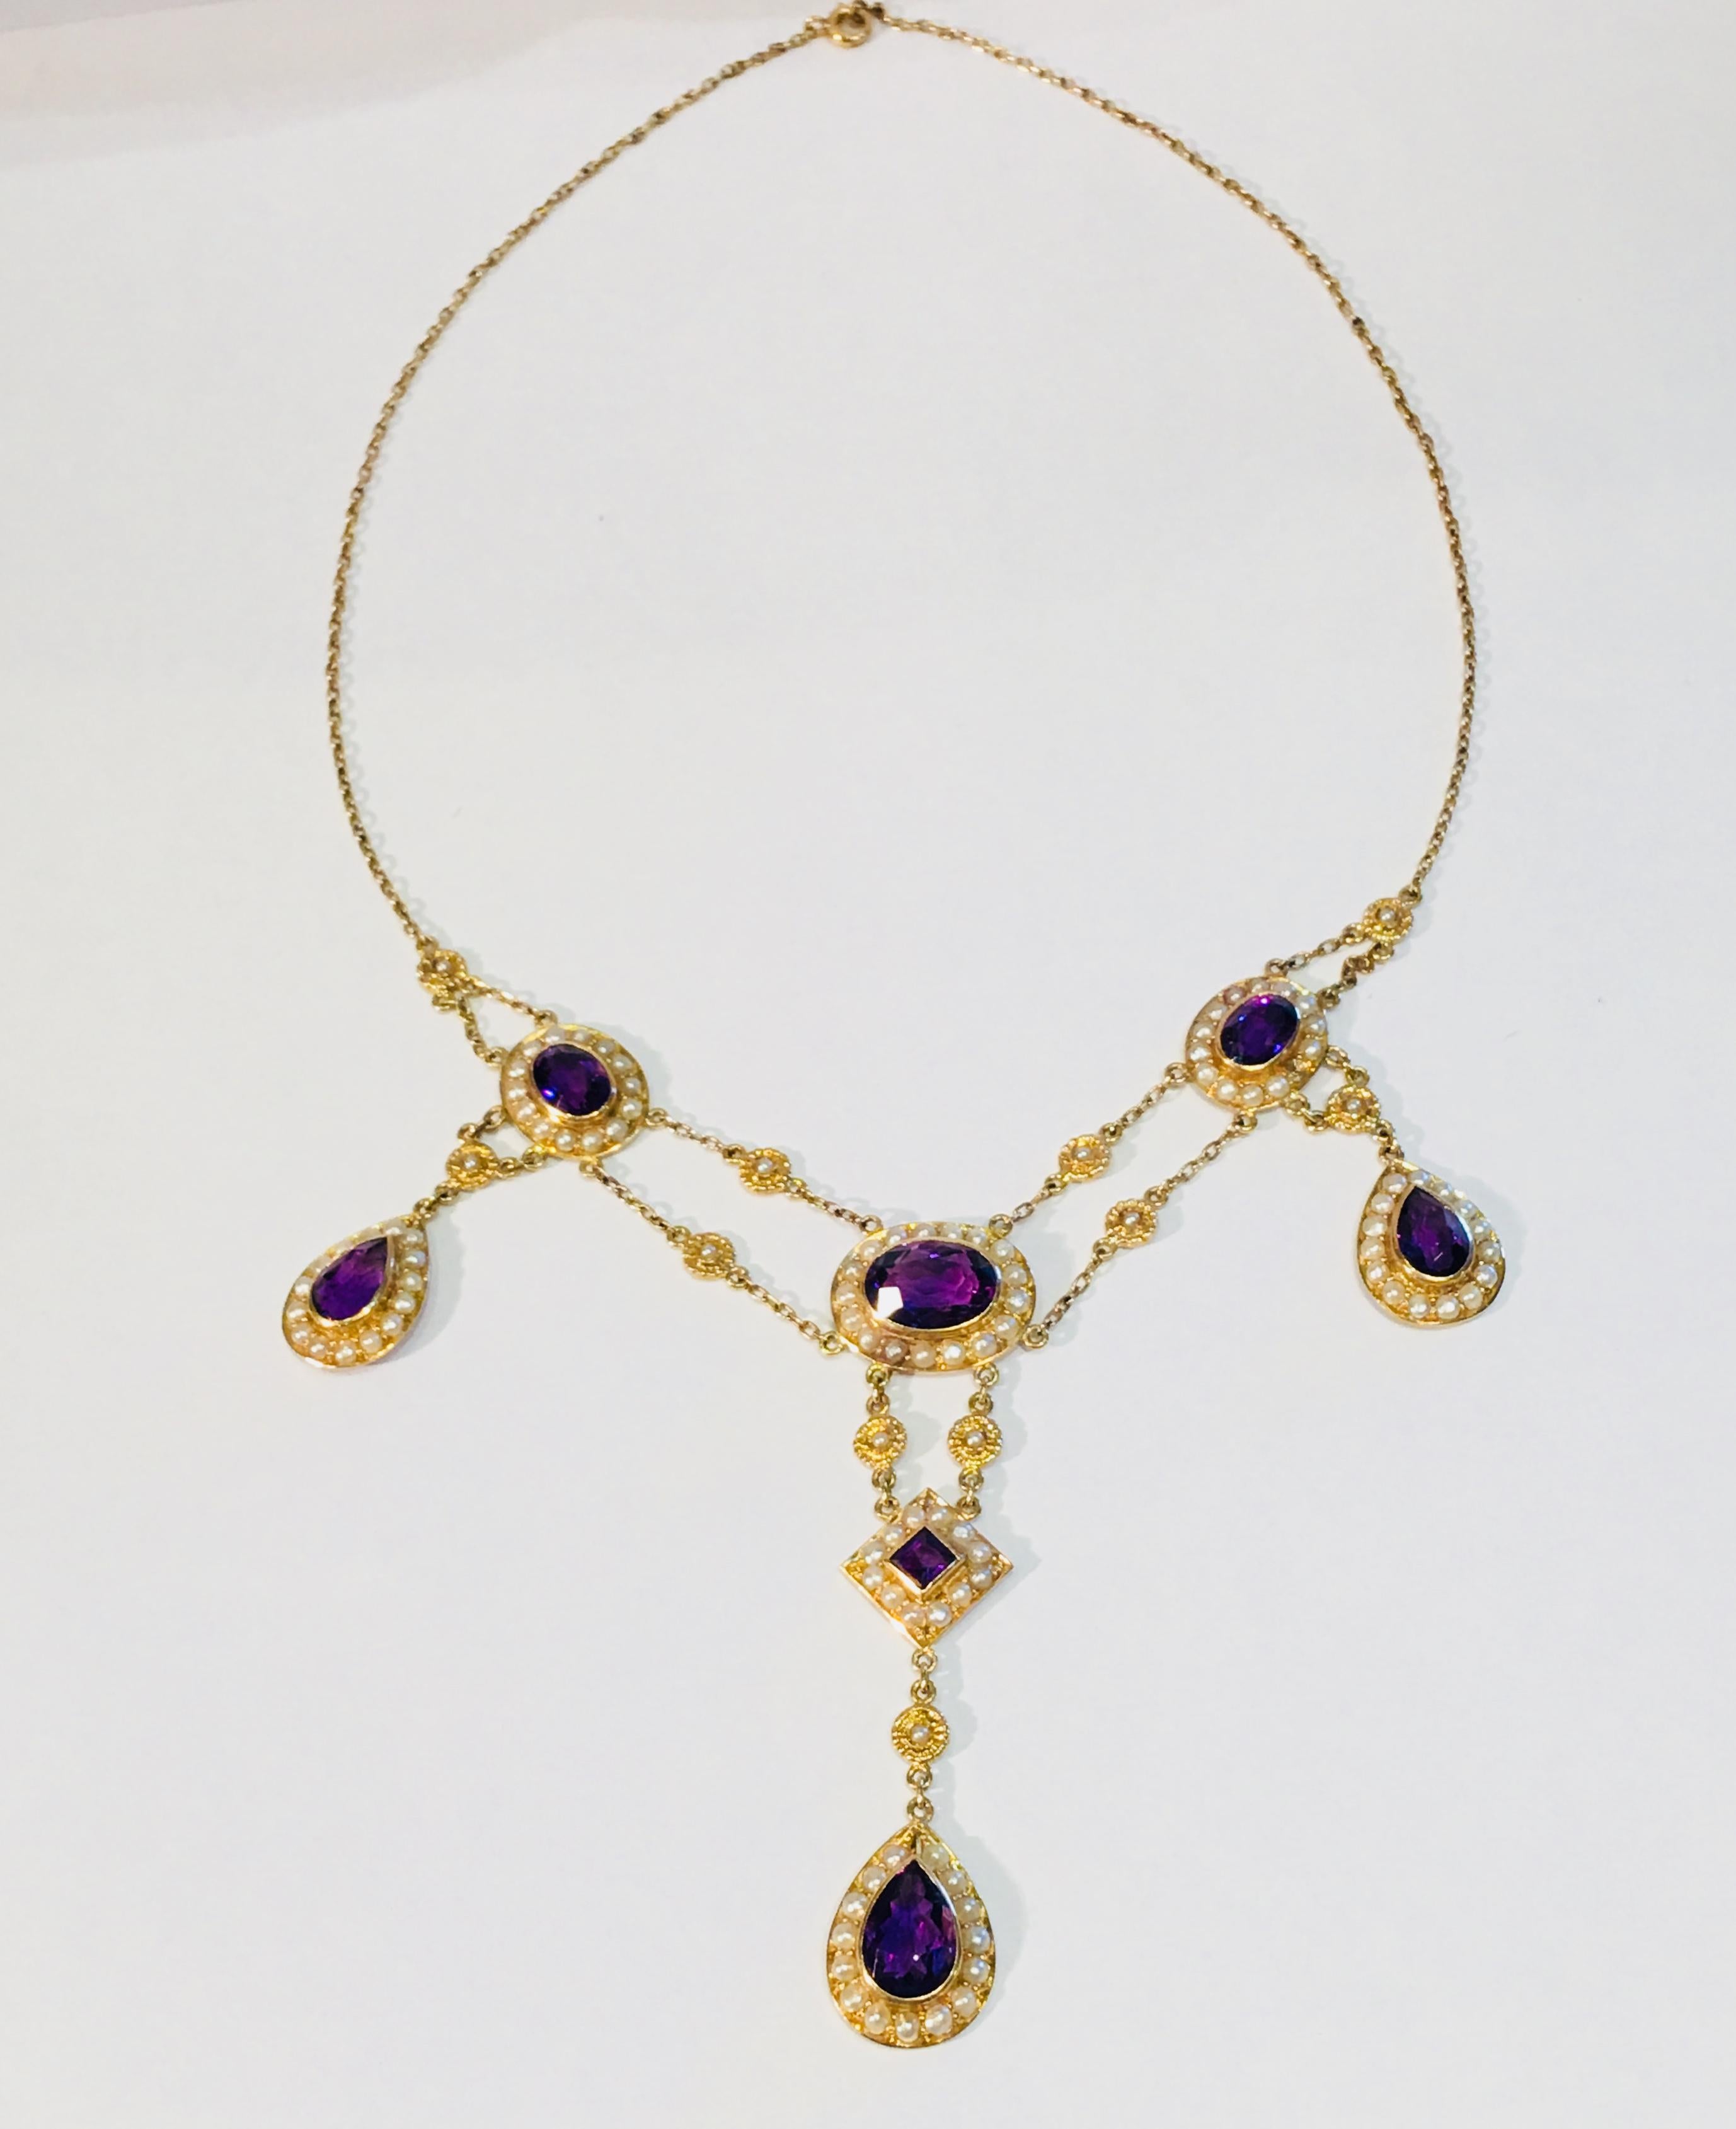 Elaborate, beautifully hand made vintage multi-strand 14 karat yellow gold chain necklace features over 9 carats of the finest quality Siberian amethysts in oval, pear and princess cuts, bezel set and surrounded by halos of seed pearls, and accented